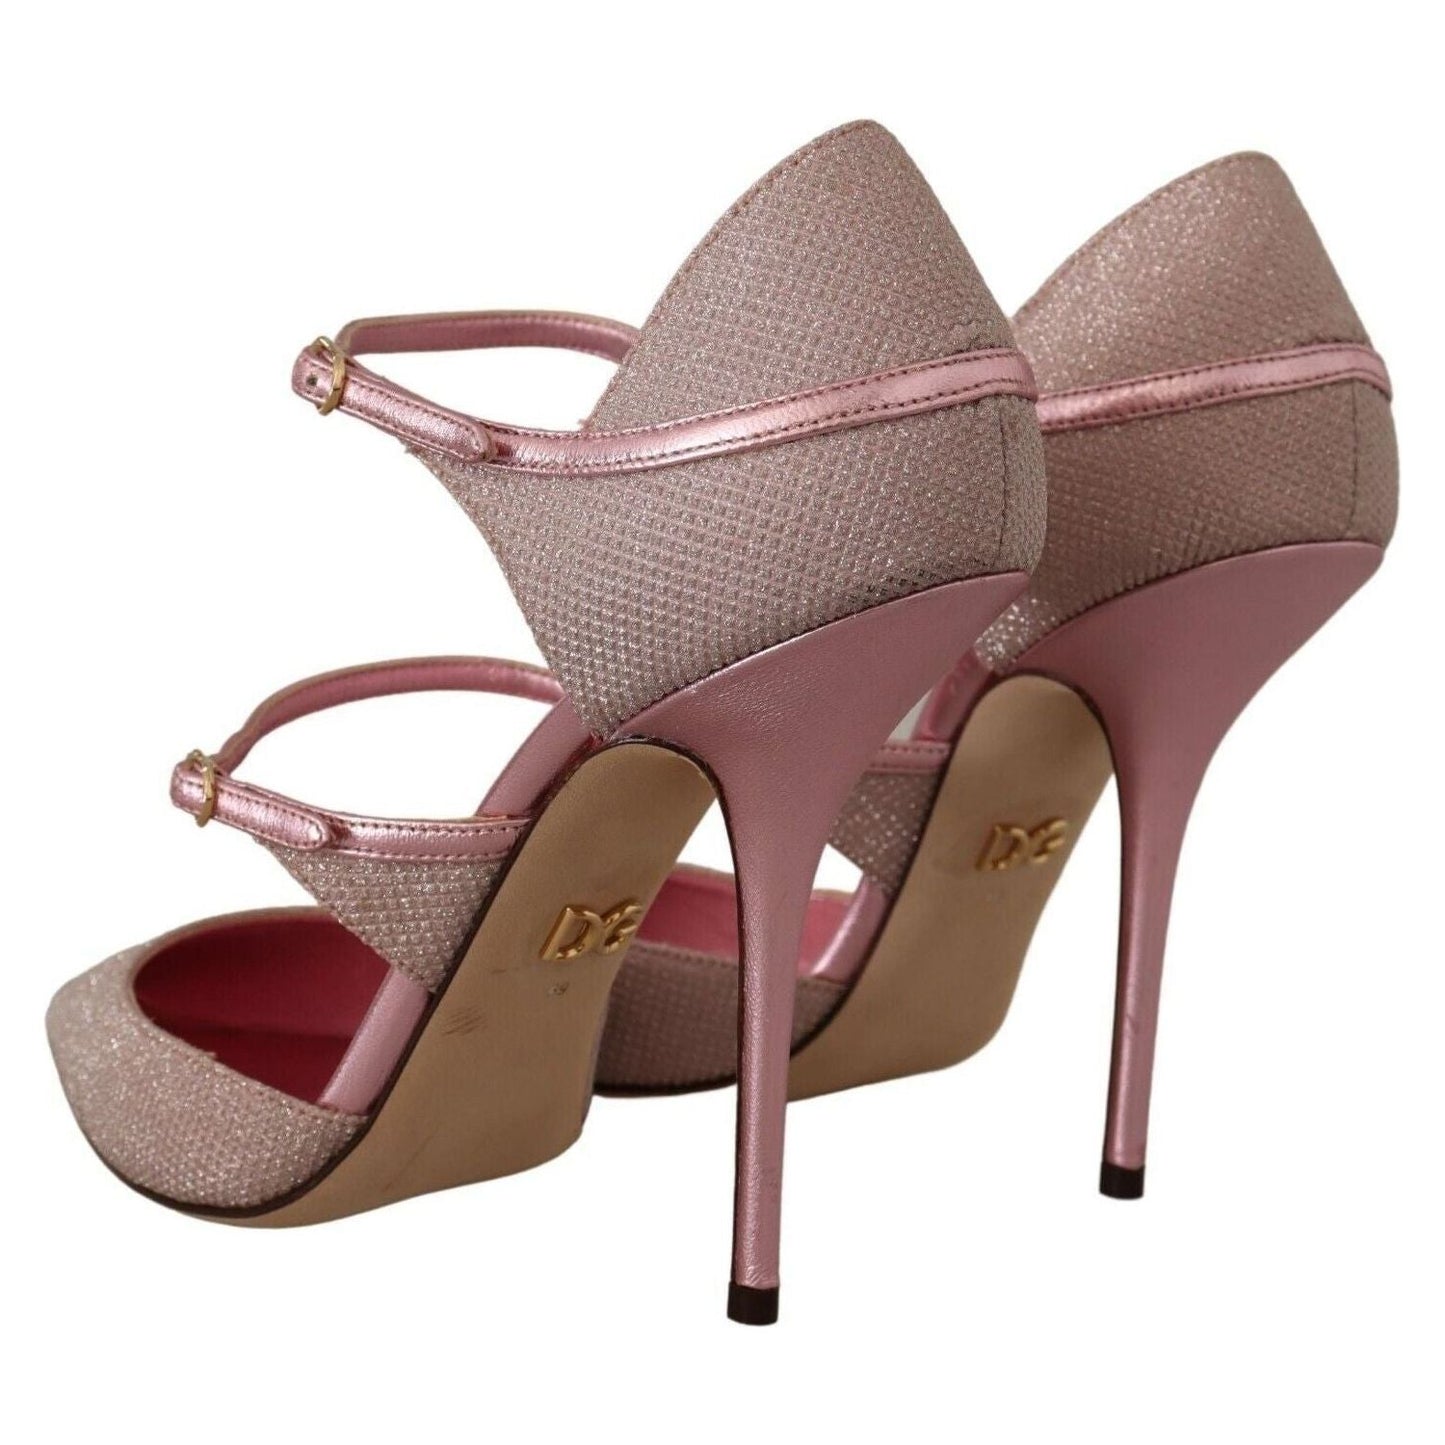 Dolce & Gabbana Pink Glitter High Heel Sandals pink-glittered-strappy-sandals-mary-jane-shoes s-l1600-3-119-d1900a6e-803.jpg